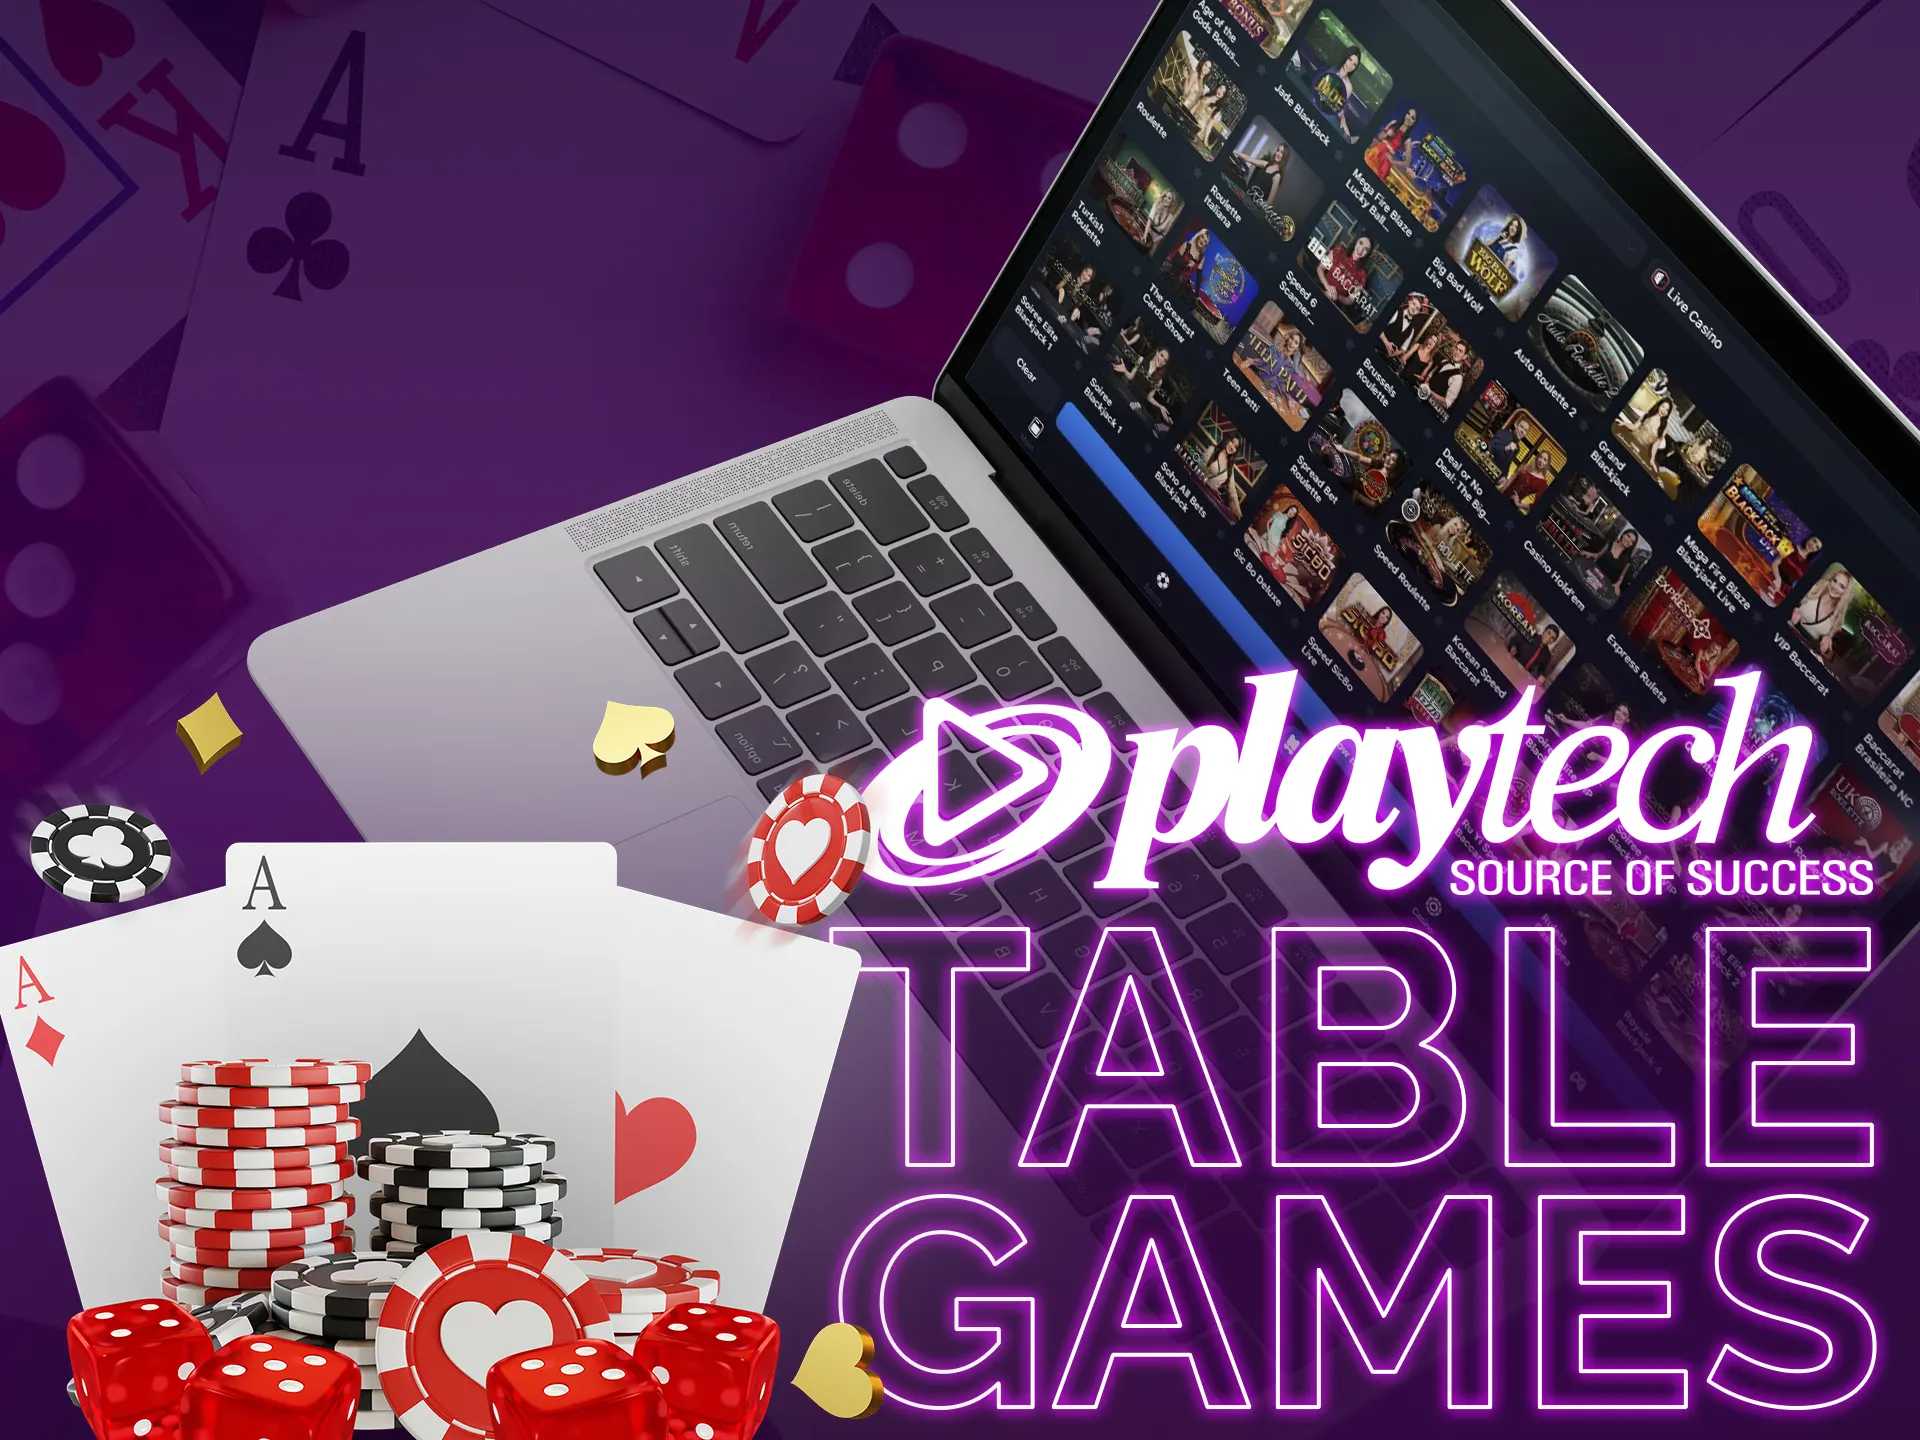 Playtech Table Games: High-quality card games, diverse variations, essential part of live gaming.